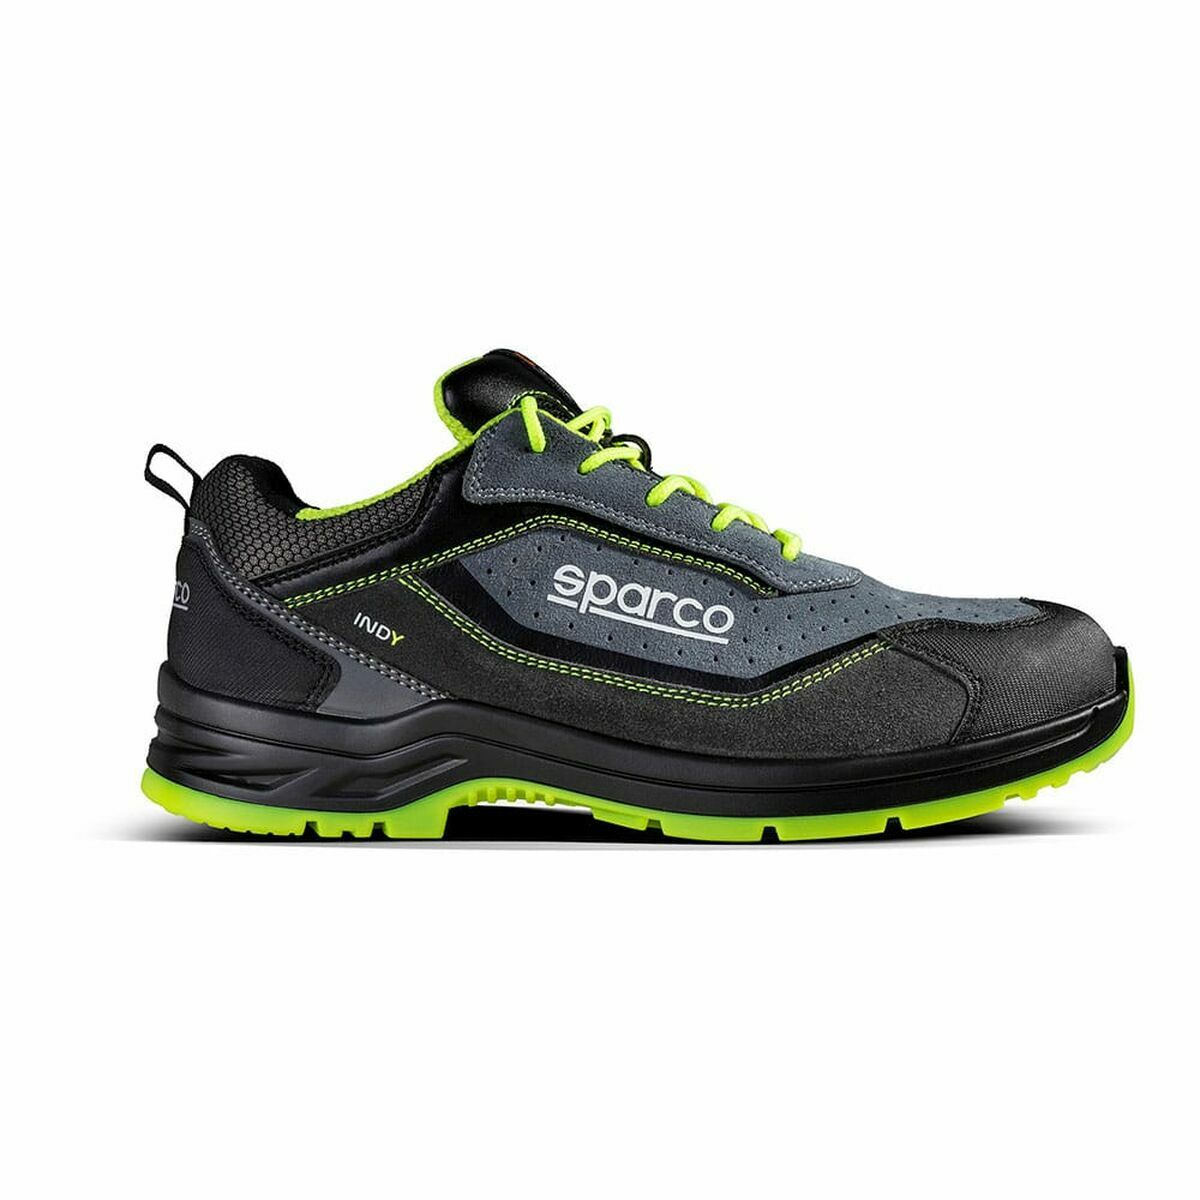 Sparco - 